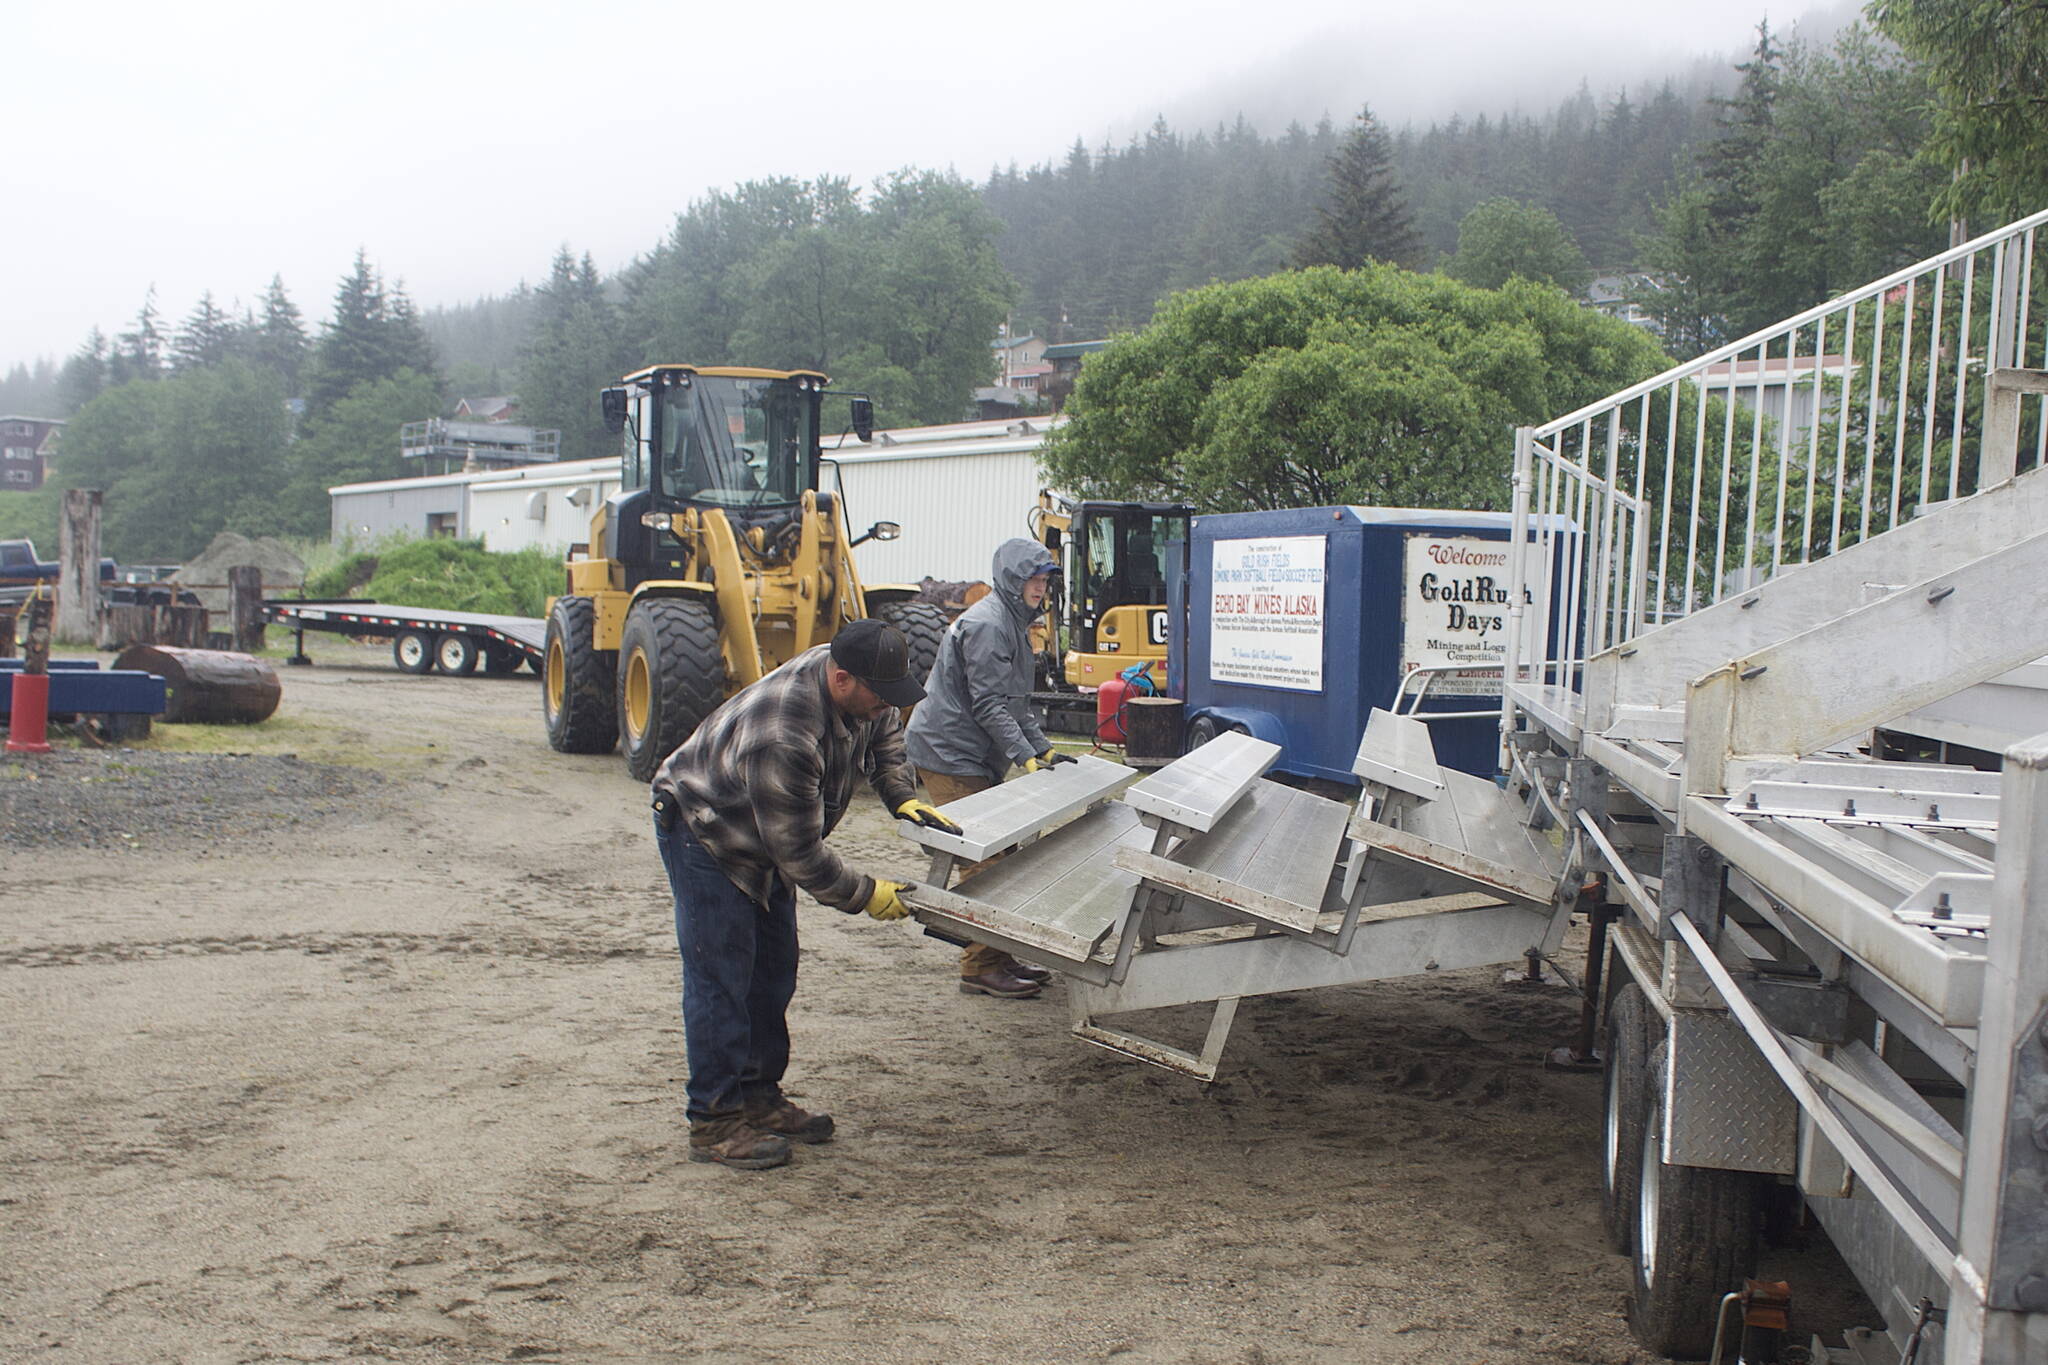 Eddie Petries, foreground, a participant in Juneau Gold Rush Days since the 1990s, and Darren Hershman, a Coeur Alaska Inc. mining intern from Fairbanks, lower a set of bleacher seats at Savikko Field on Monday in preparation for the events that begin Saturday. Gold Rush Days is celebrating its 30th year after making its debut in 1990 and missing two years during the pandemic. (Mark Sabbatini / Juneau Empire)